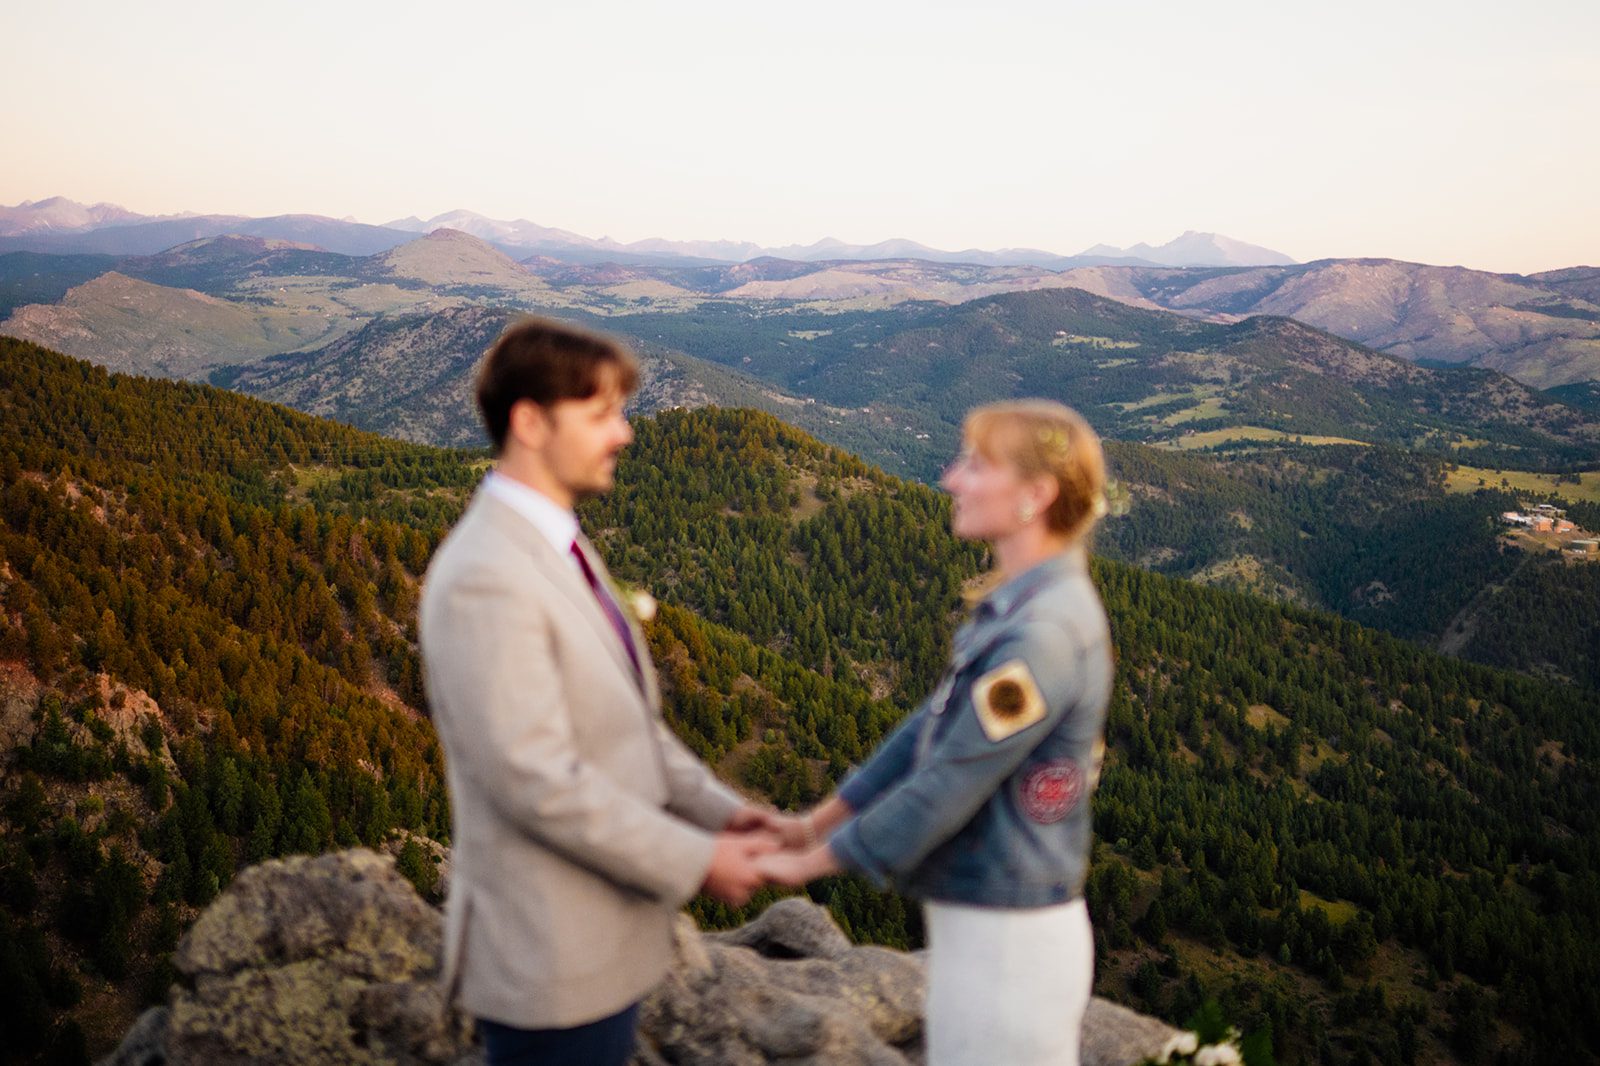 views of the Boulder during sunrise elopement ceremony at Lost Gulch Overlook